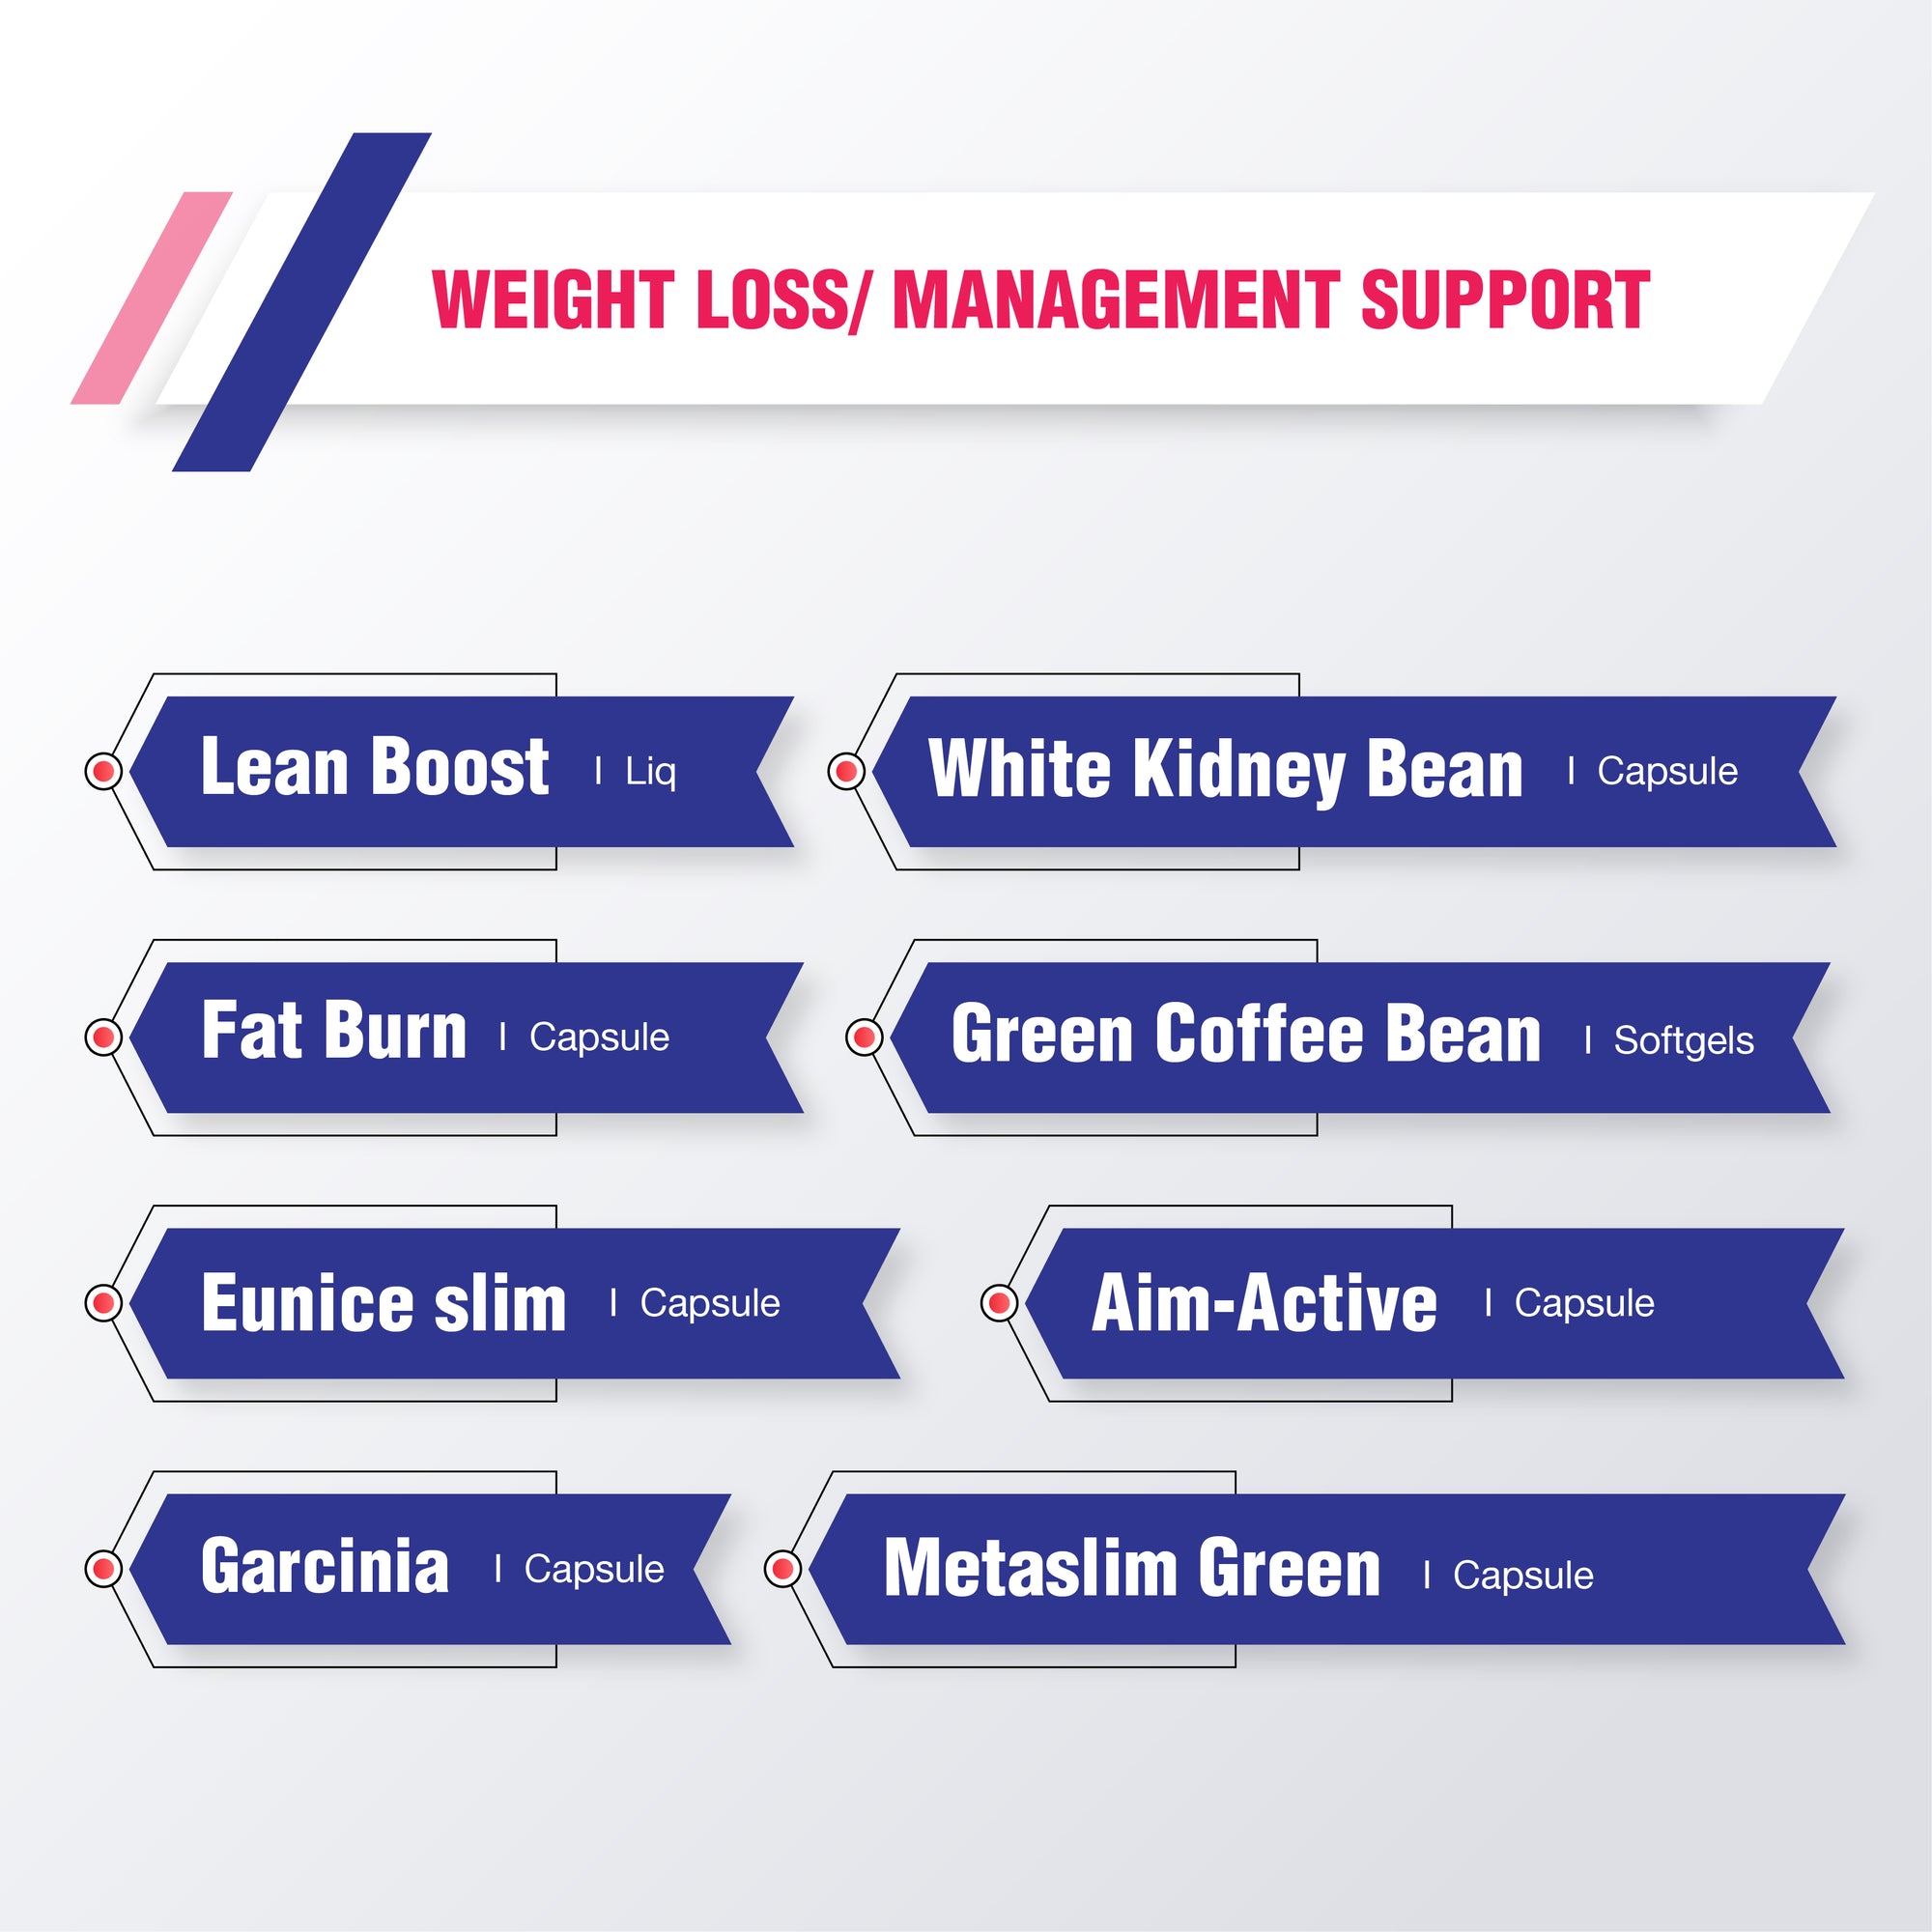 Weight loss/ Management support